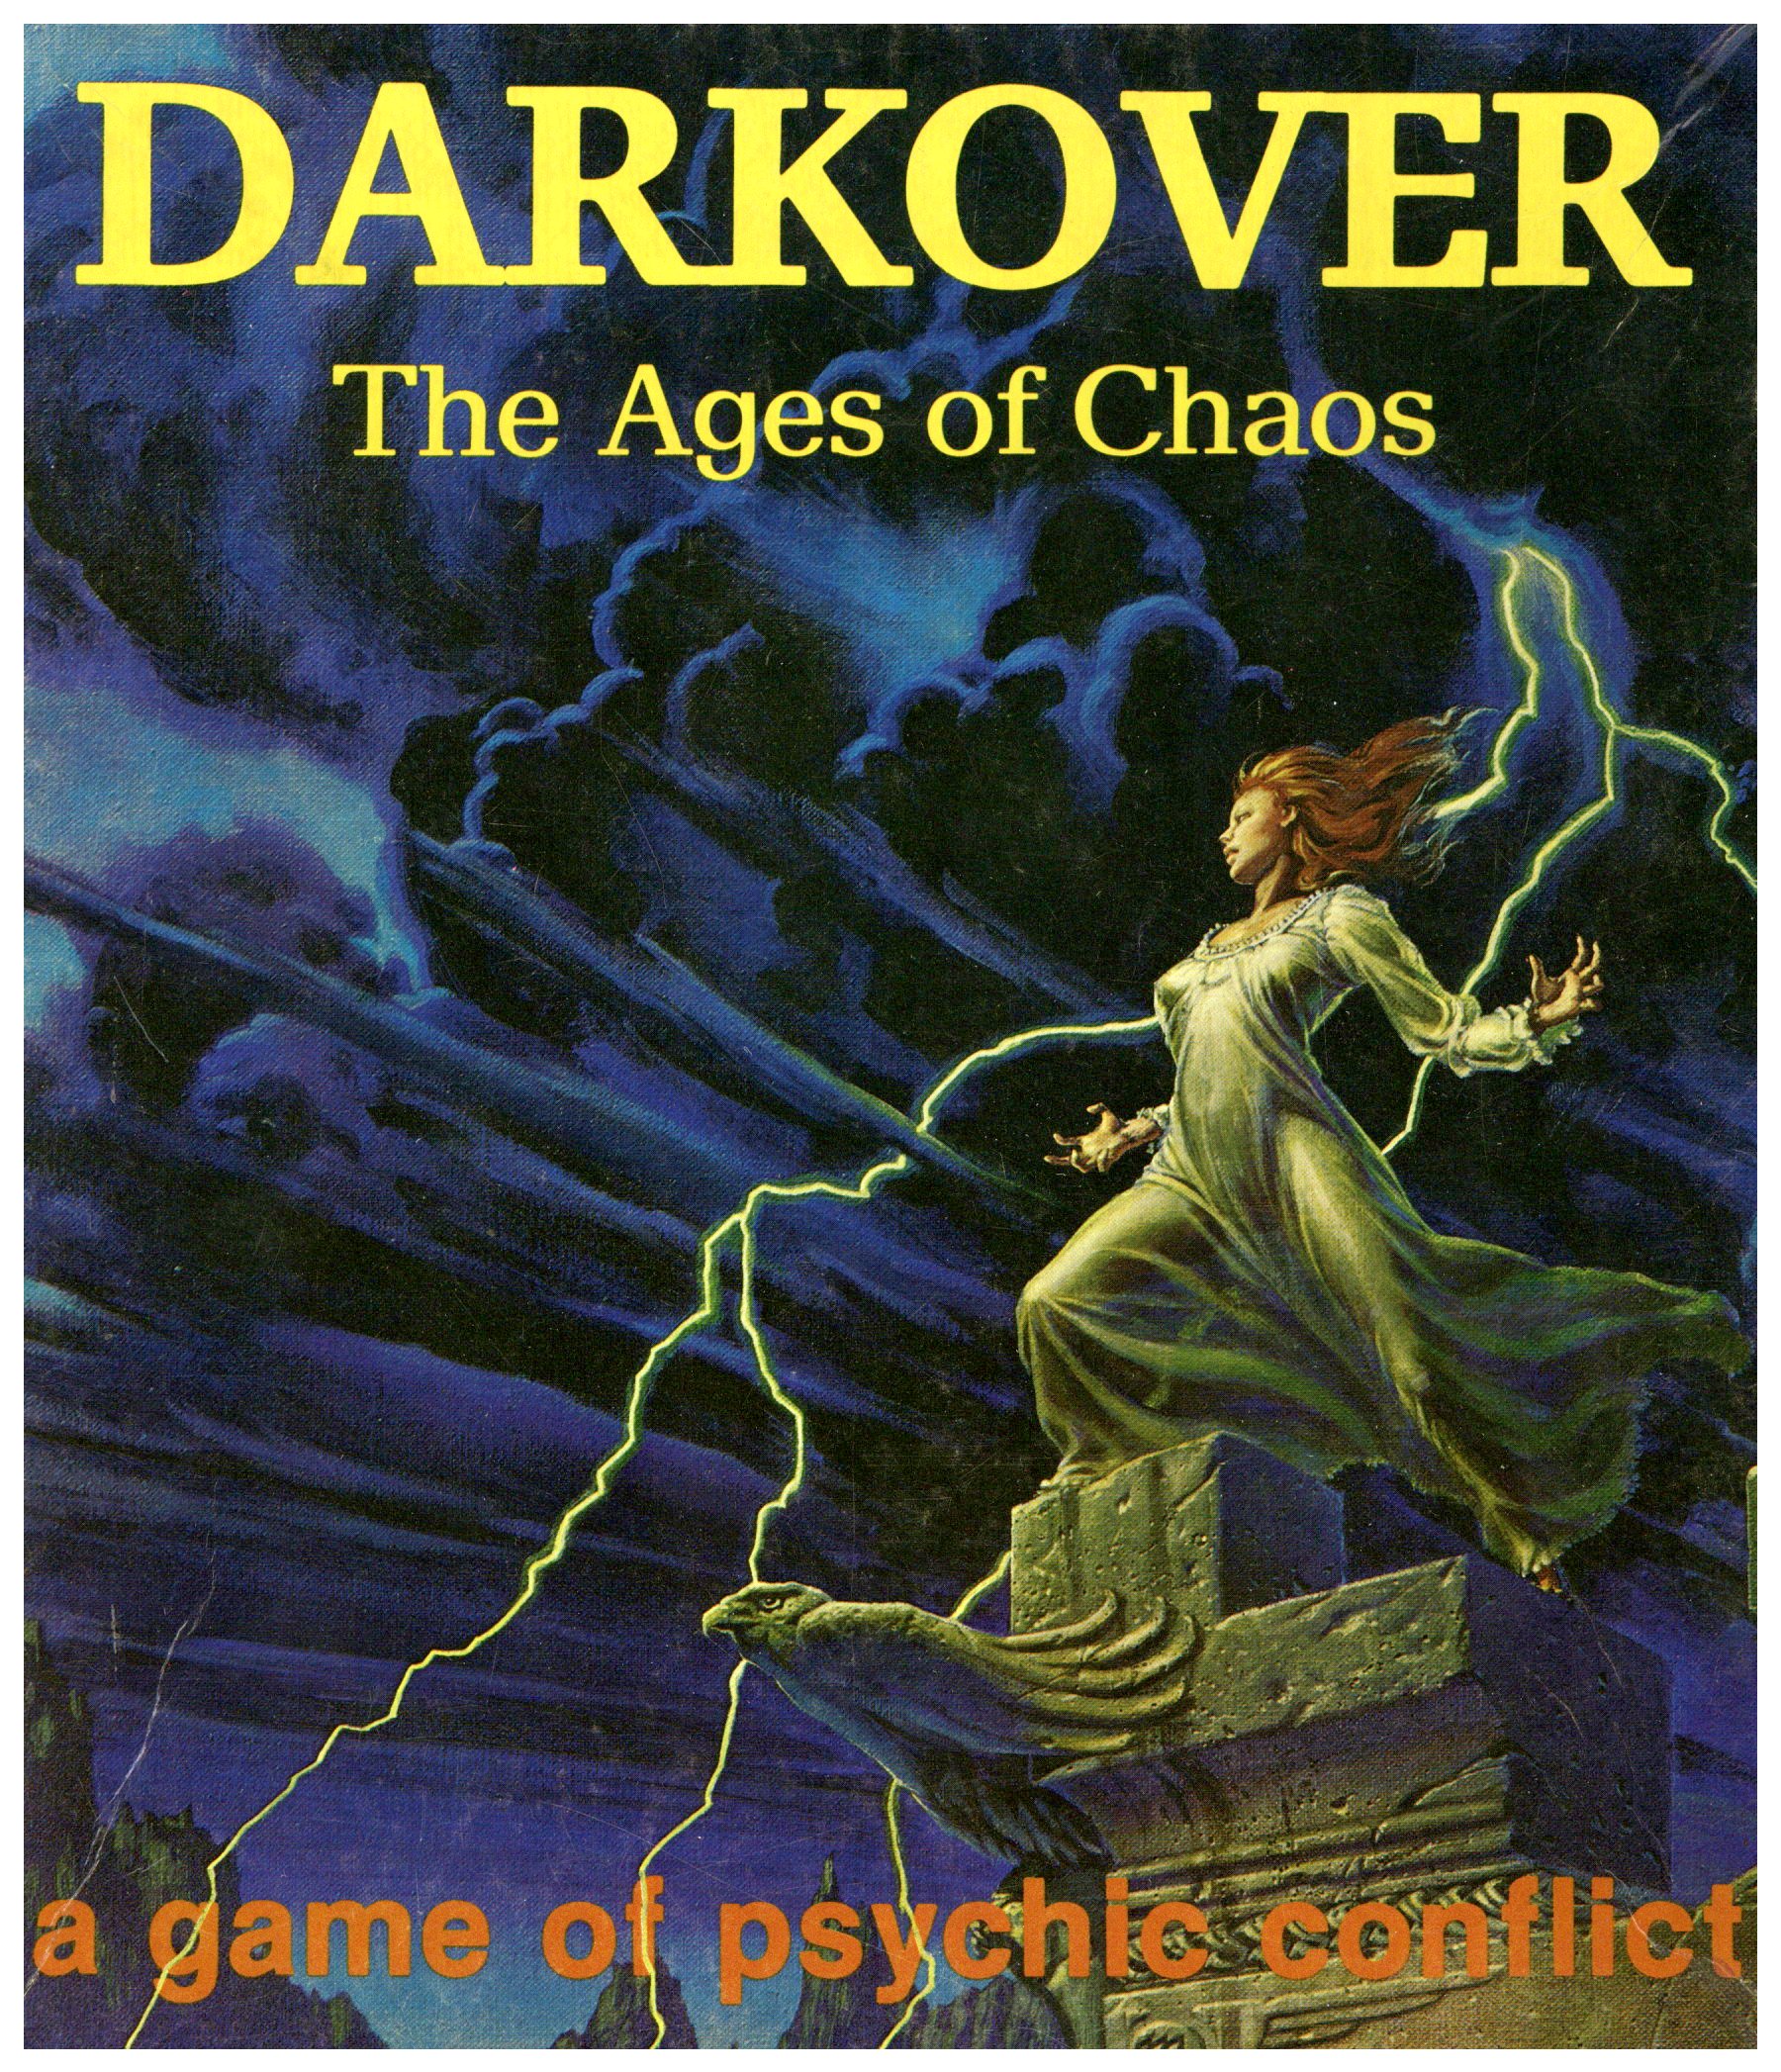 Darkover: the age of chaos